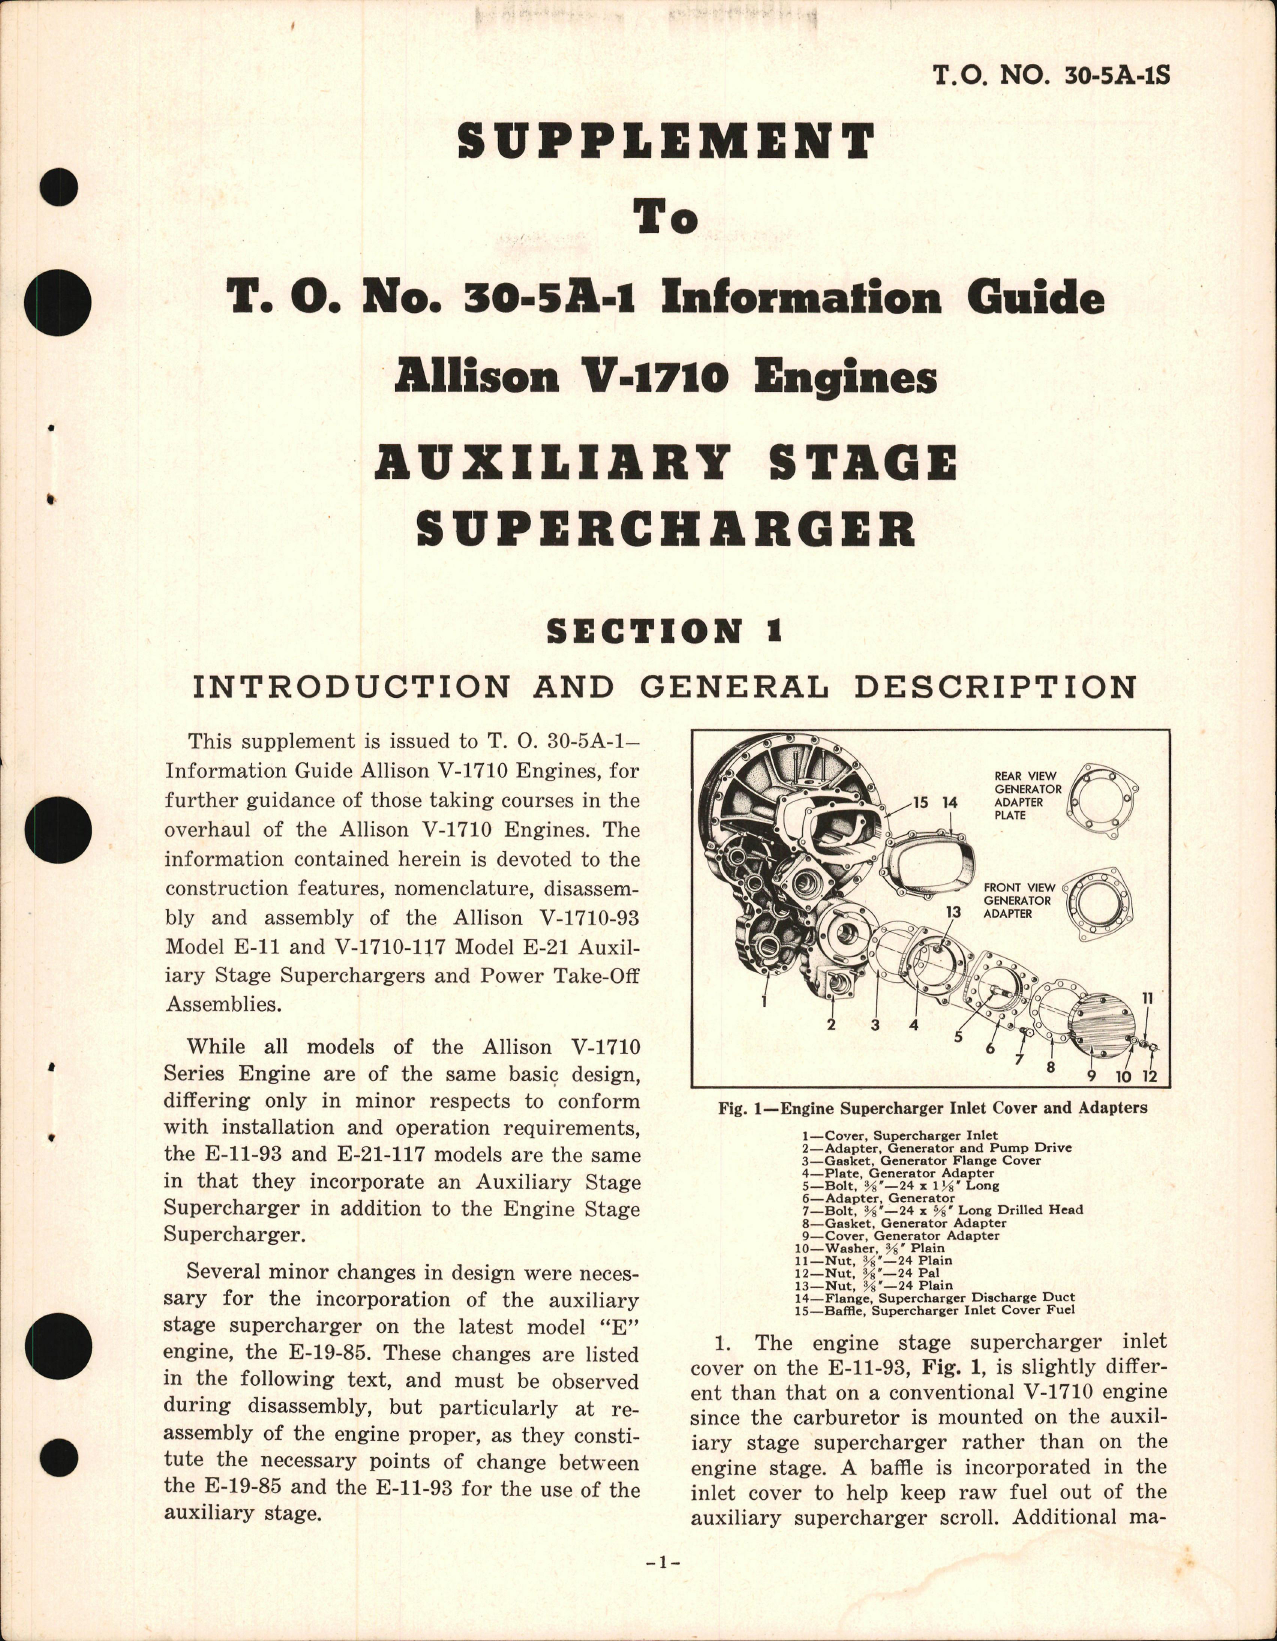 Sample page 5 from AirCorps Library document: Information Guide for Auxiliary Stage Supercharger for V-1710 Engines